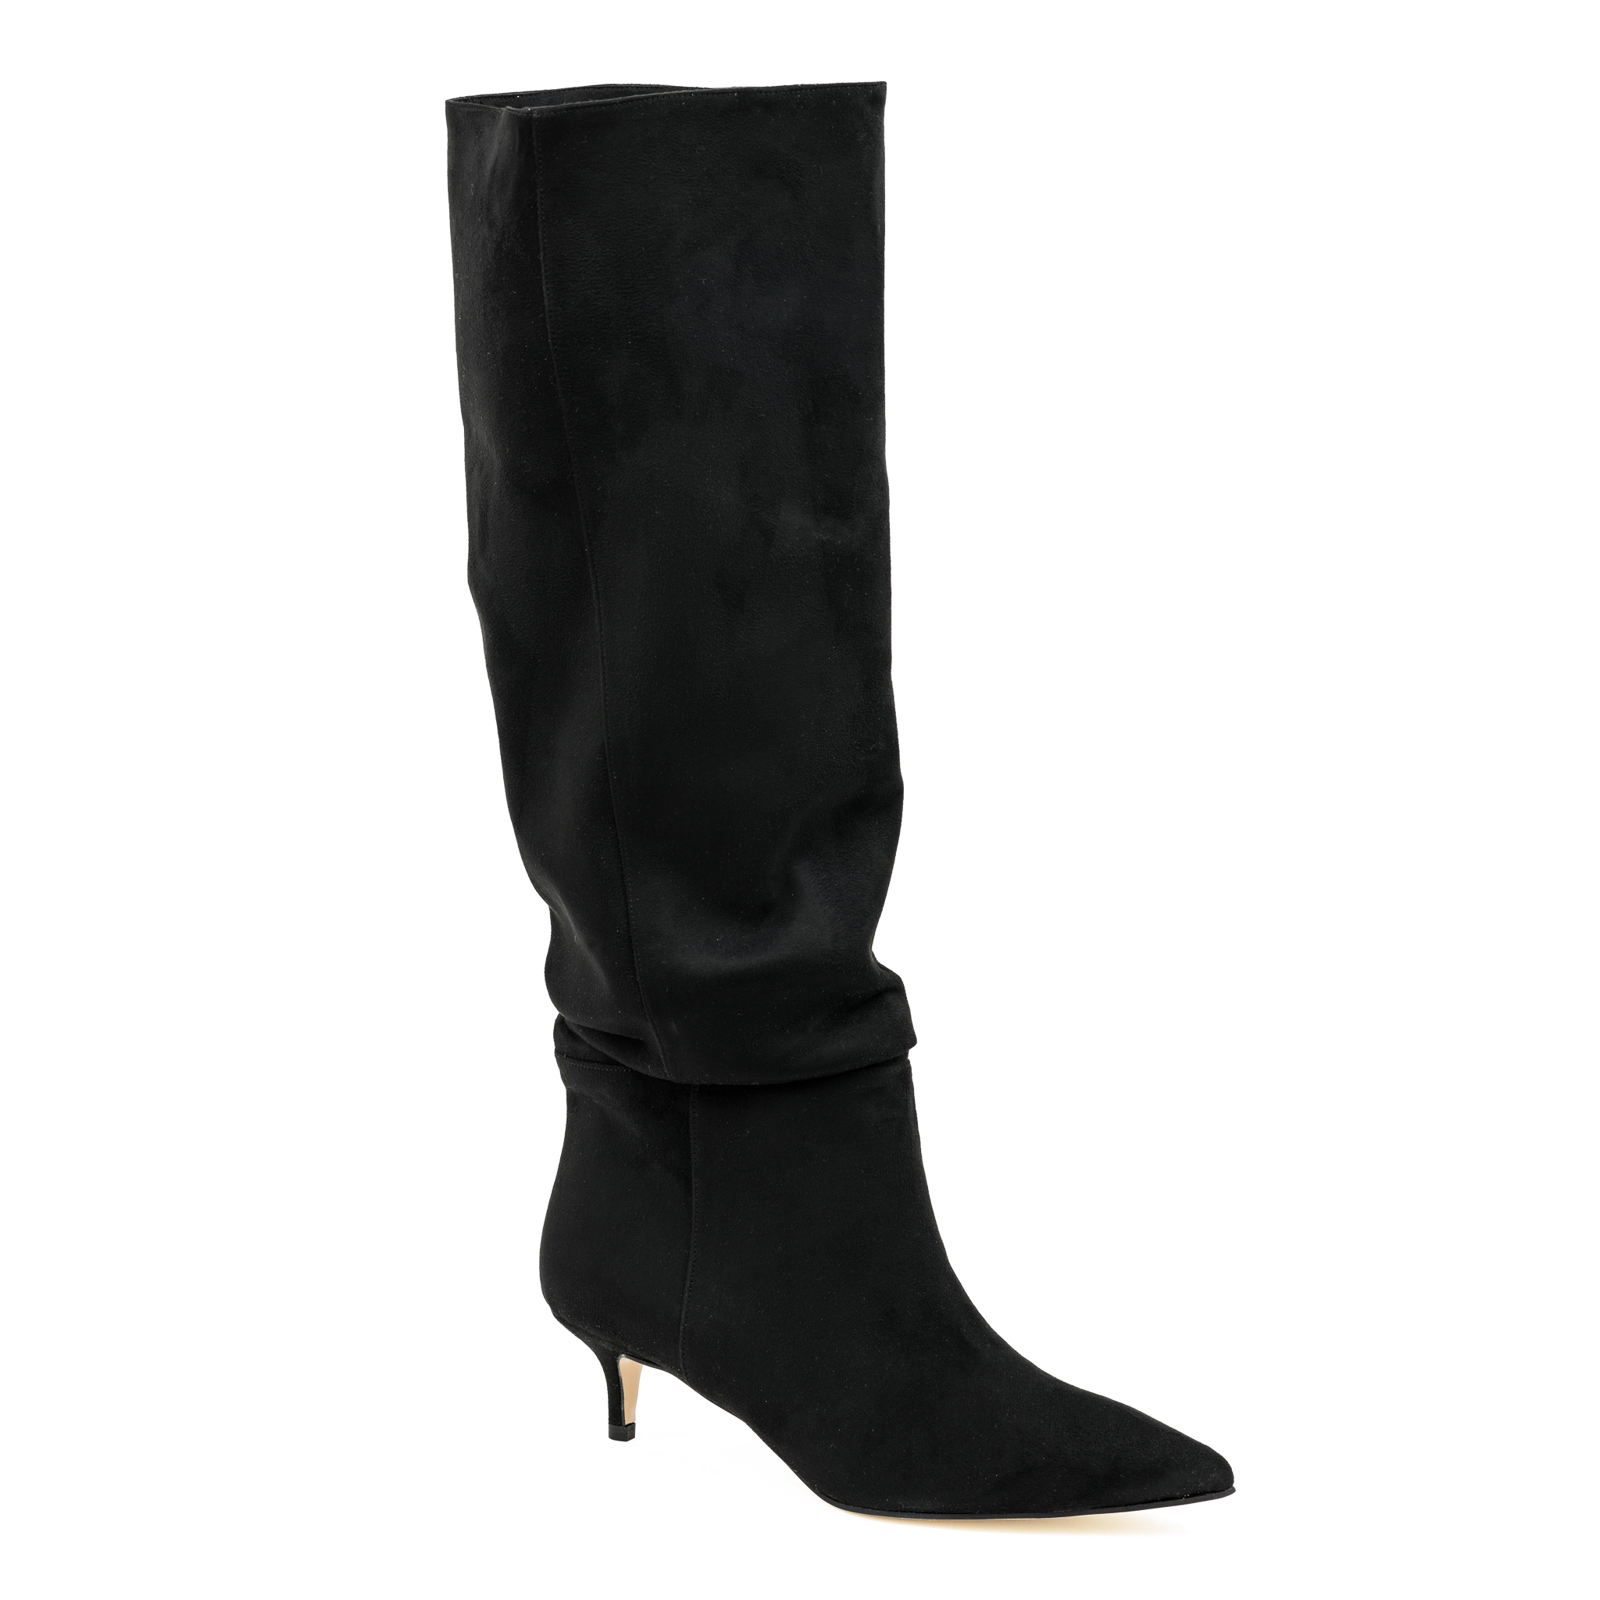 VELOUR WRINKLED SPIKE BOOTS WITH THIN HEEL - BLACK